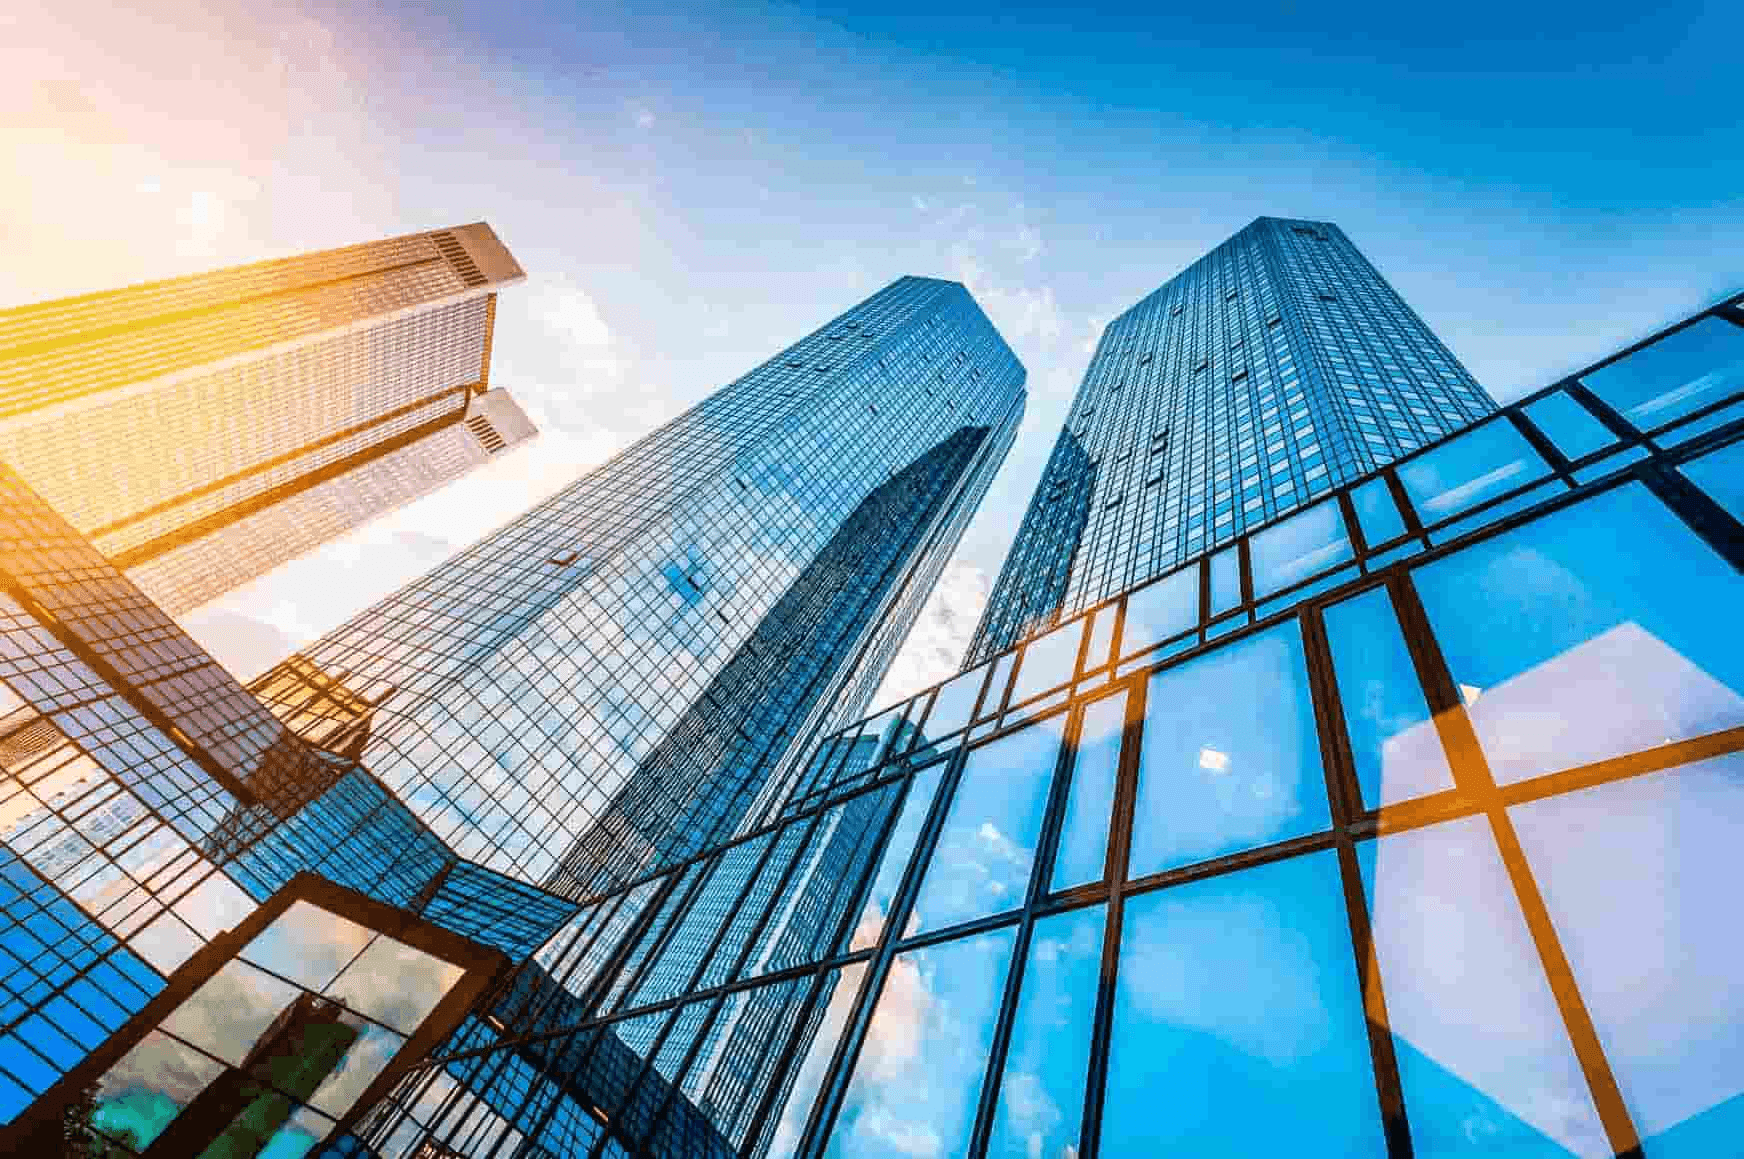 Low angle view of modern skyscrapers with glass facades under a clear blue sky.